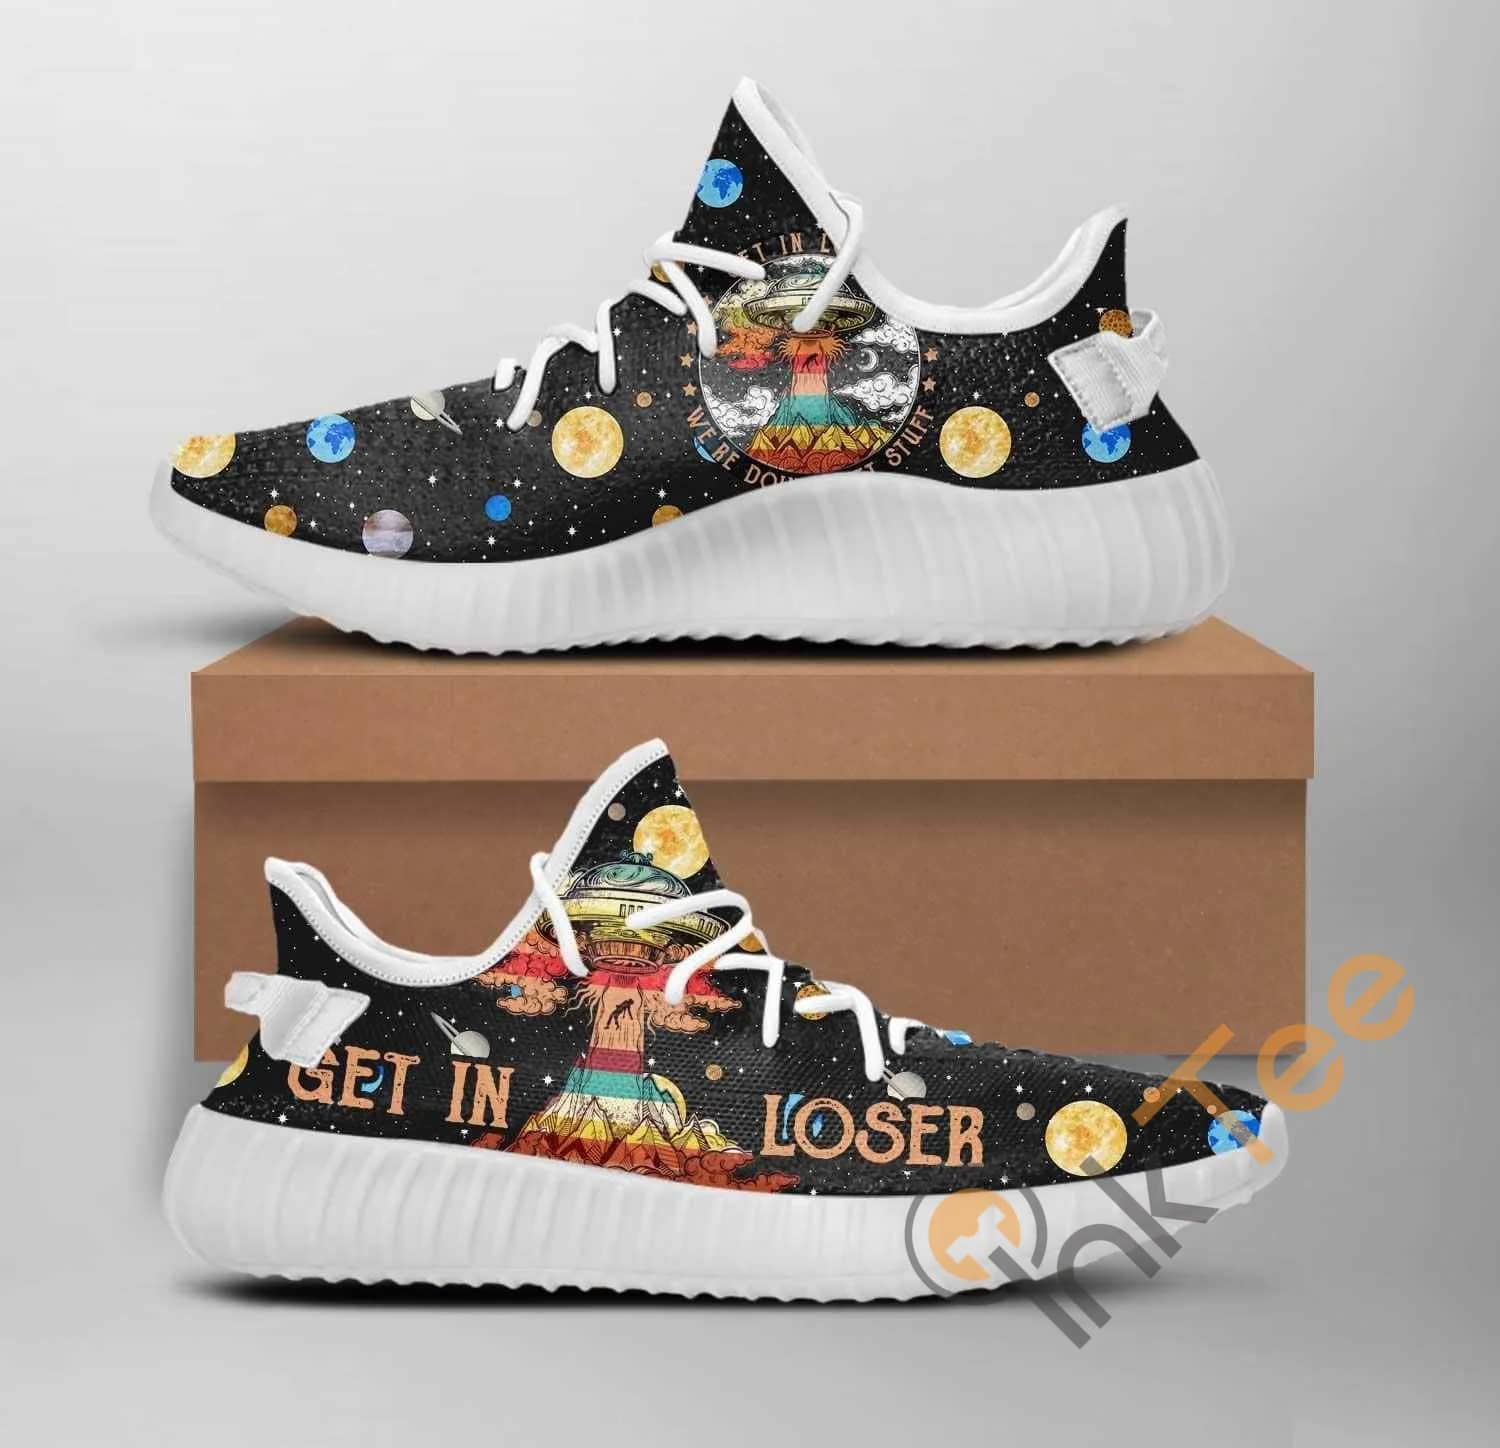 Camping Art Amazon Best Selling Yeezy Boost